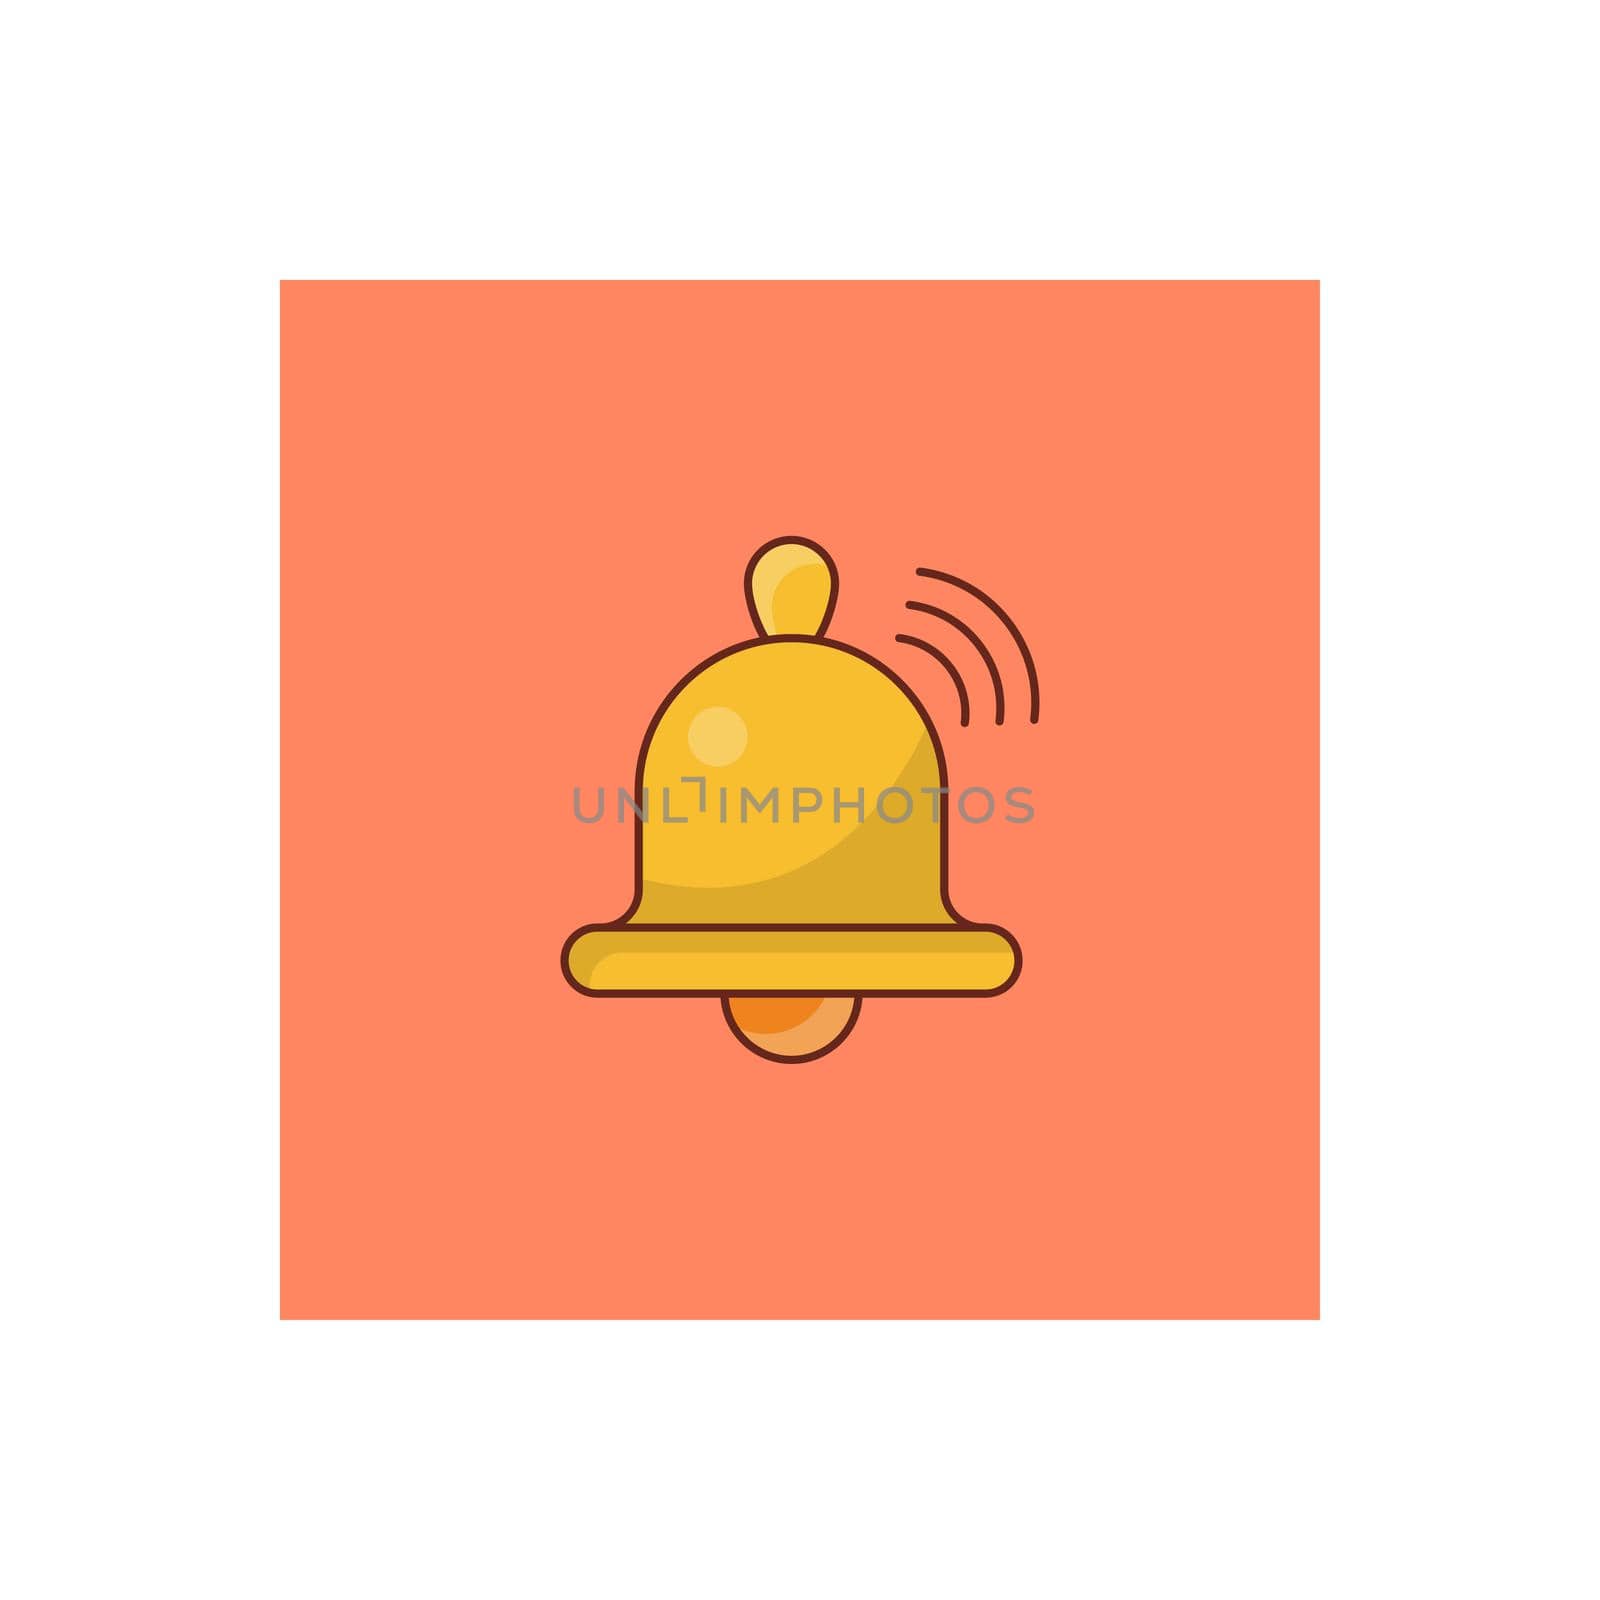 alarm Vector illustration on a transparent background. Premium quality symbols. Vector Line Flat color icon for concept and graphic design.